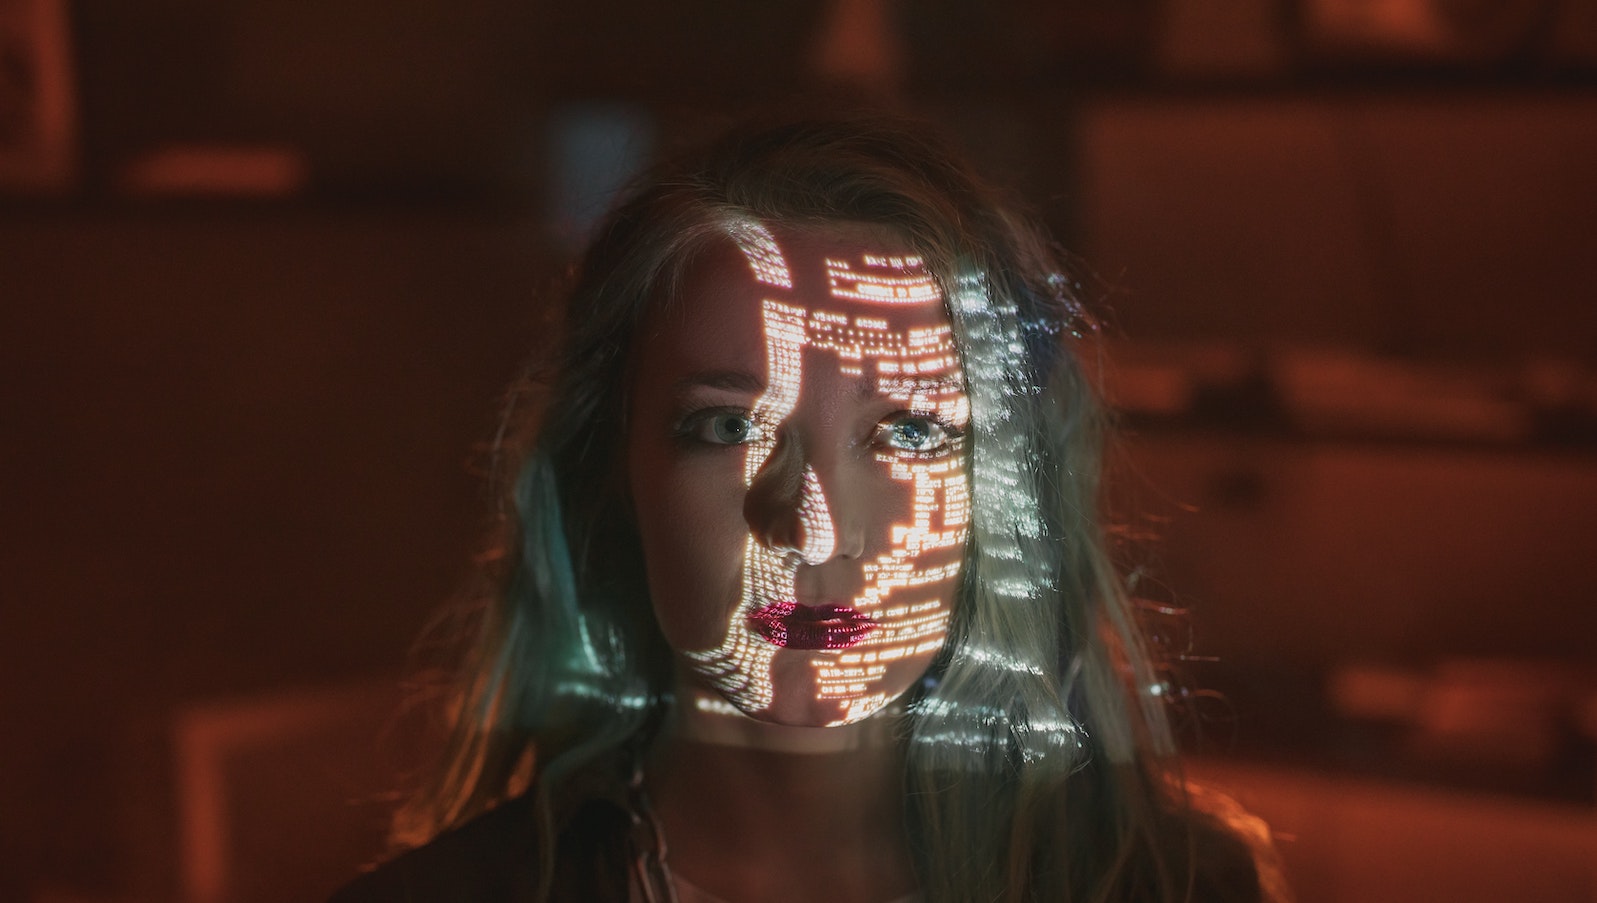 A Woman with Green Hair Looking at the Camera with a dark background and white code text across her face